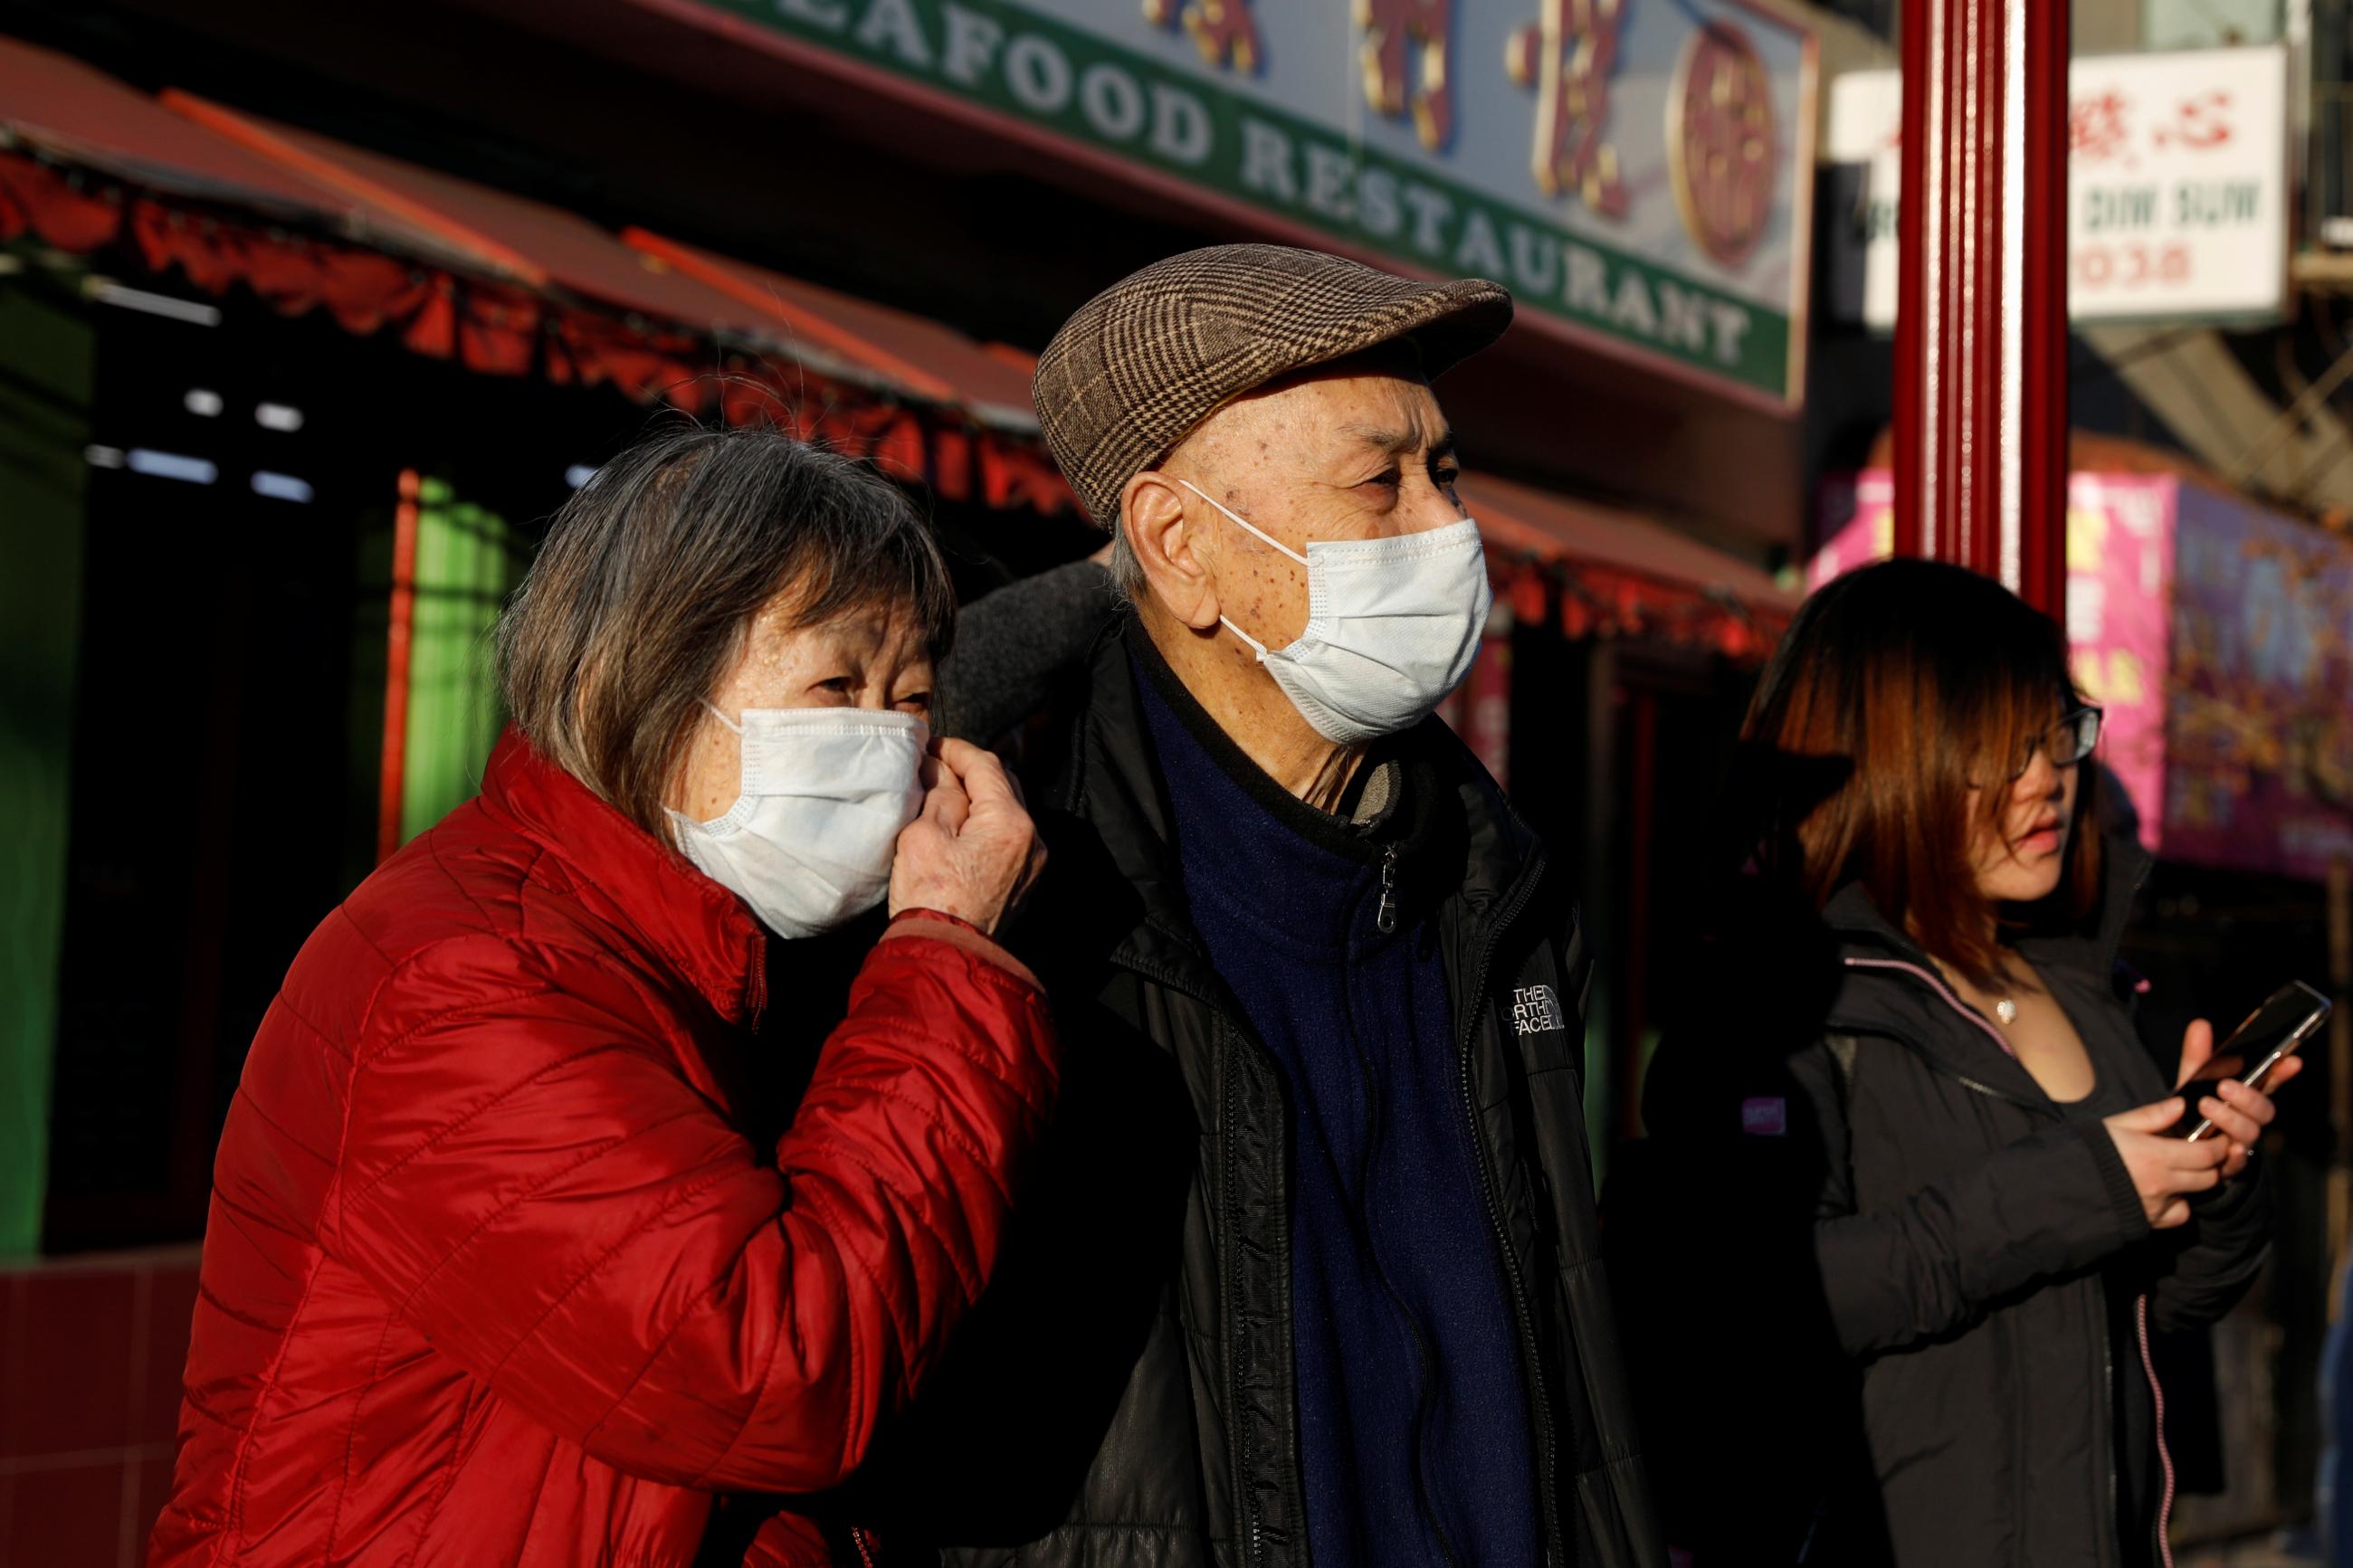 People wearing face masks walk through the Chinatown section of San Francisco, California, U.S., February 26, 2020.